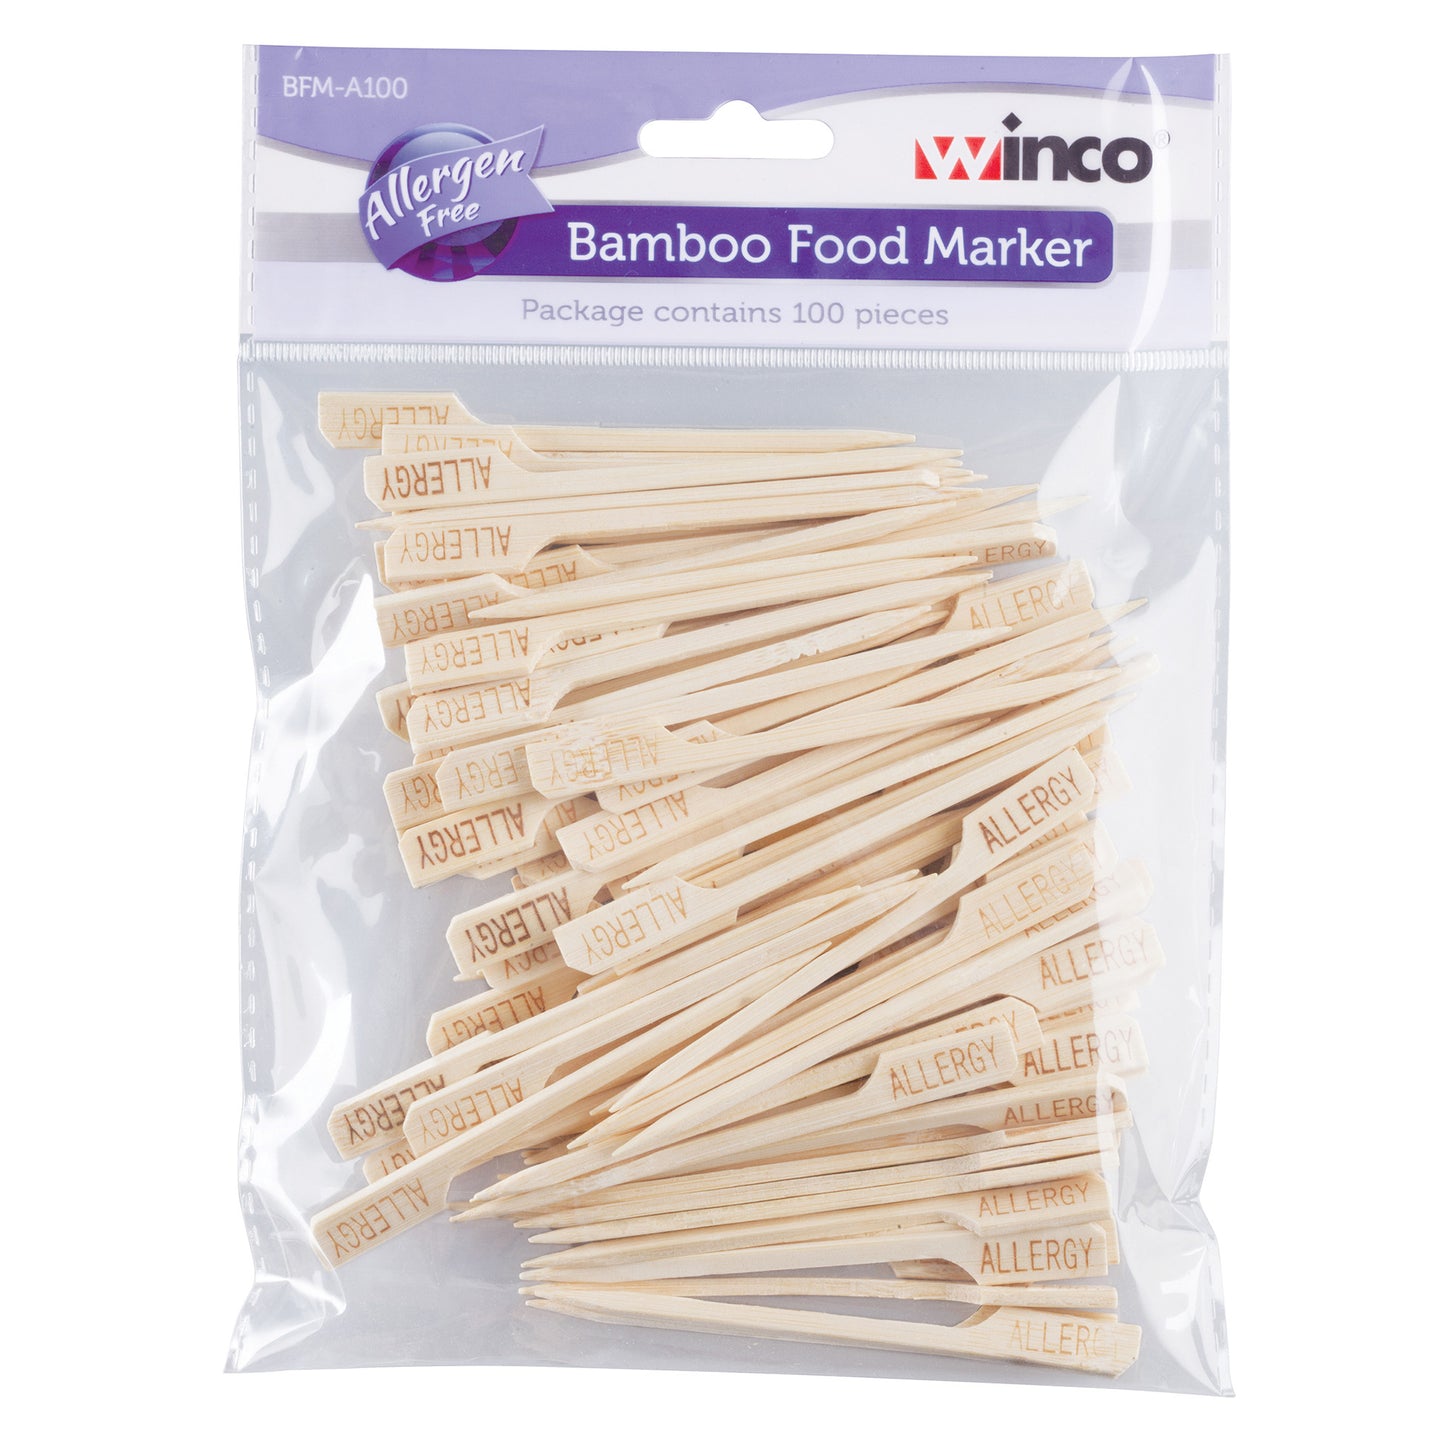 BFM-A100 - Bamboo Food Markers, Allergen Free, 100 Pieces per Pack